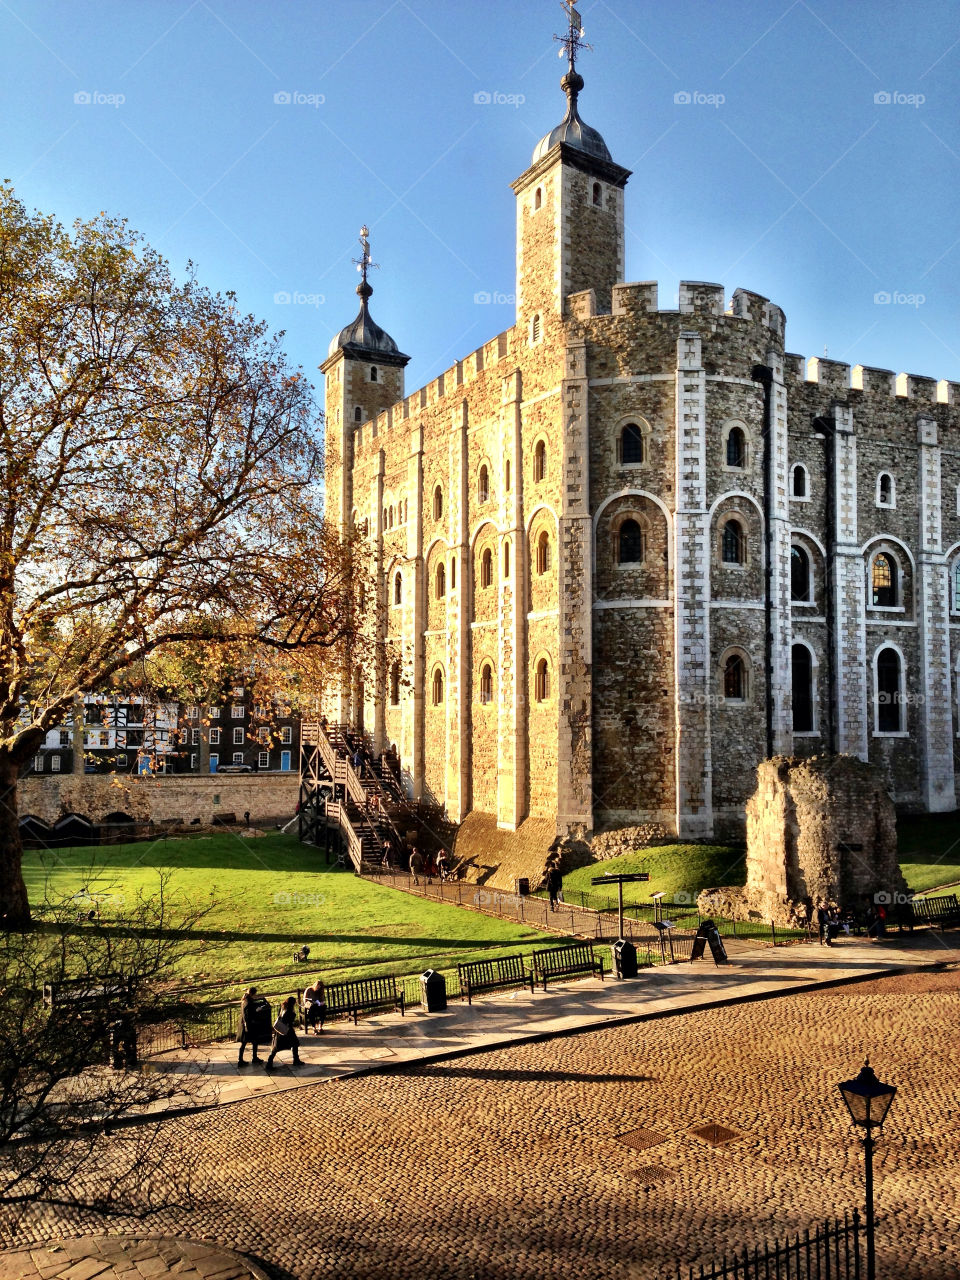 london england london tower white tower by kmcw1405